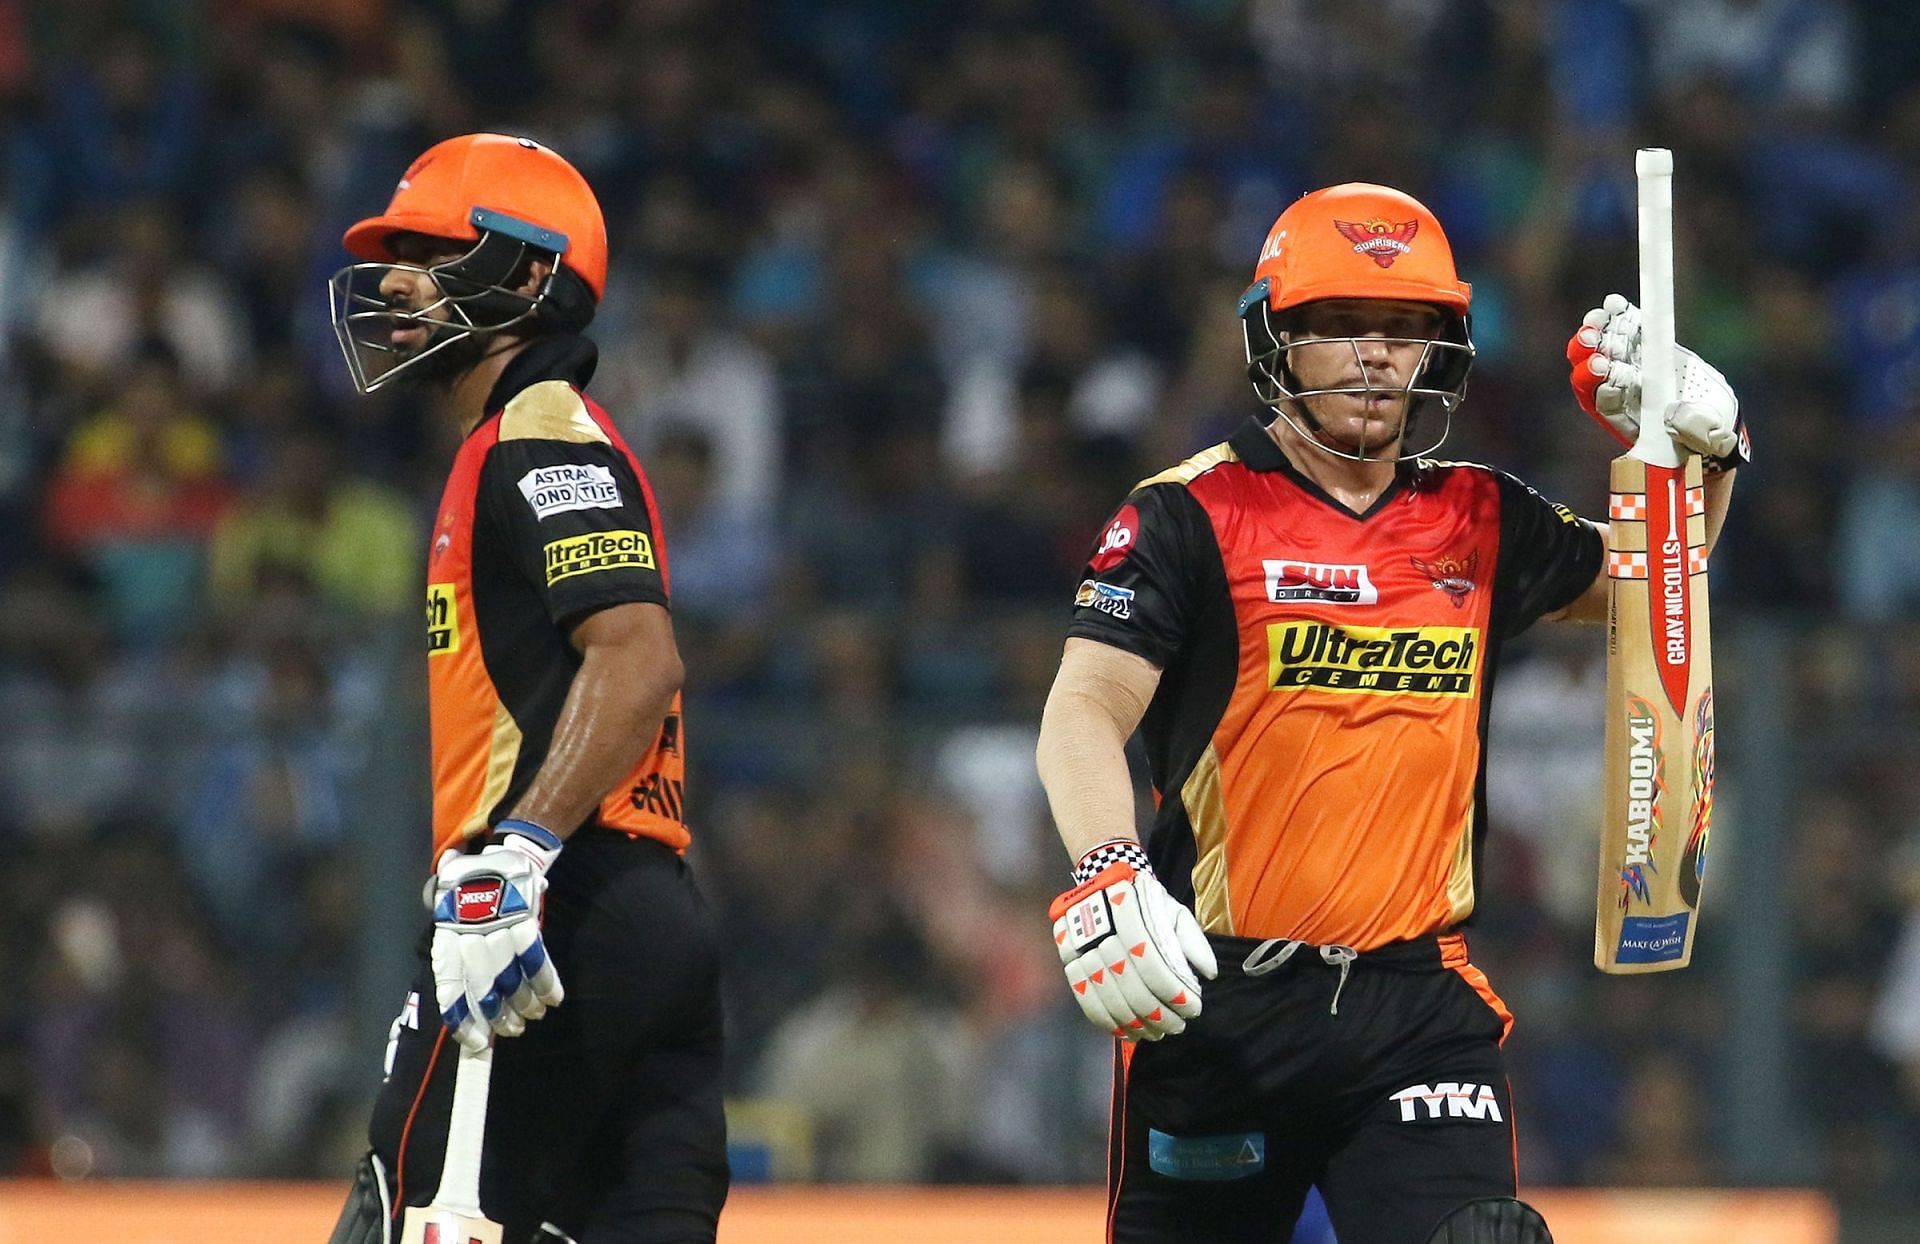 Dhawan and Warner are among the highest run scorers in IPL history